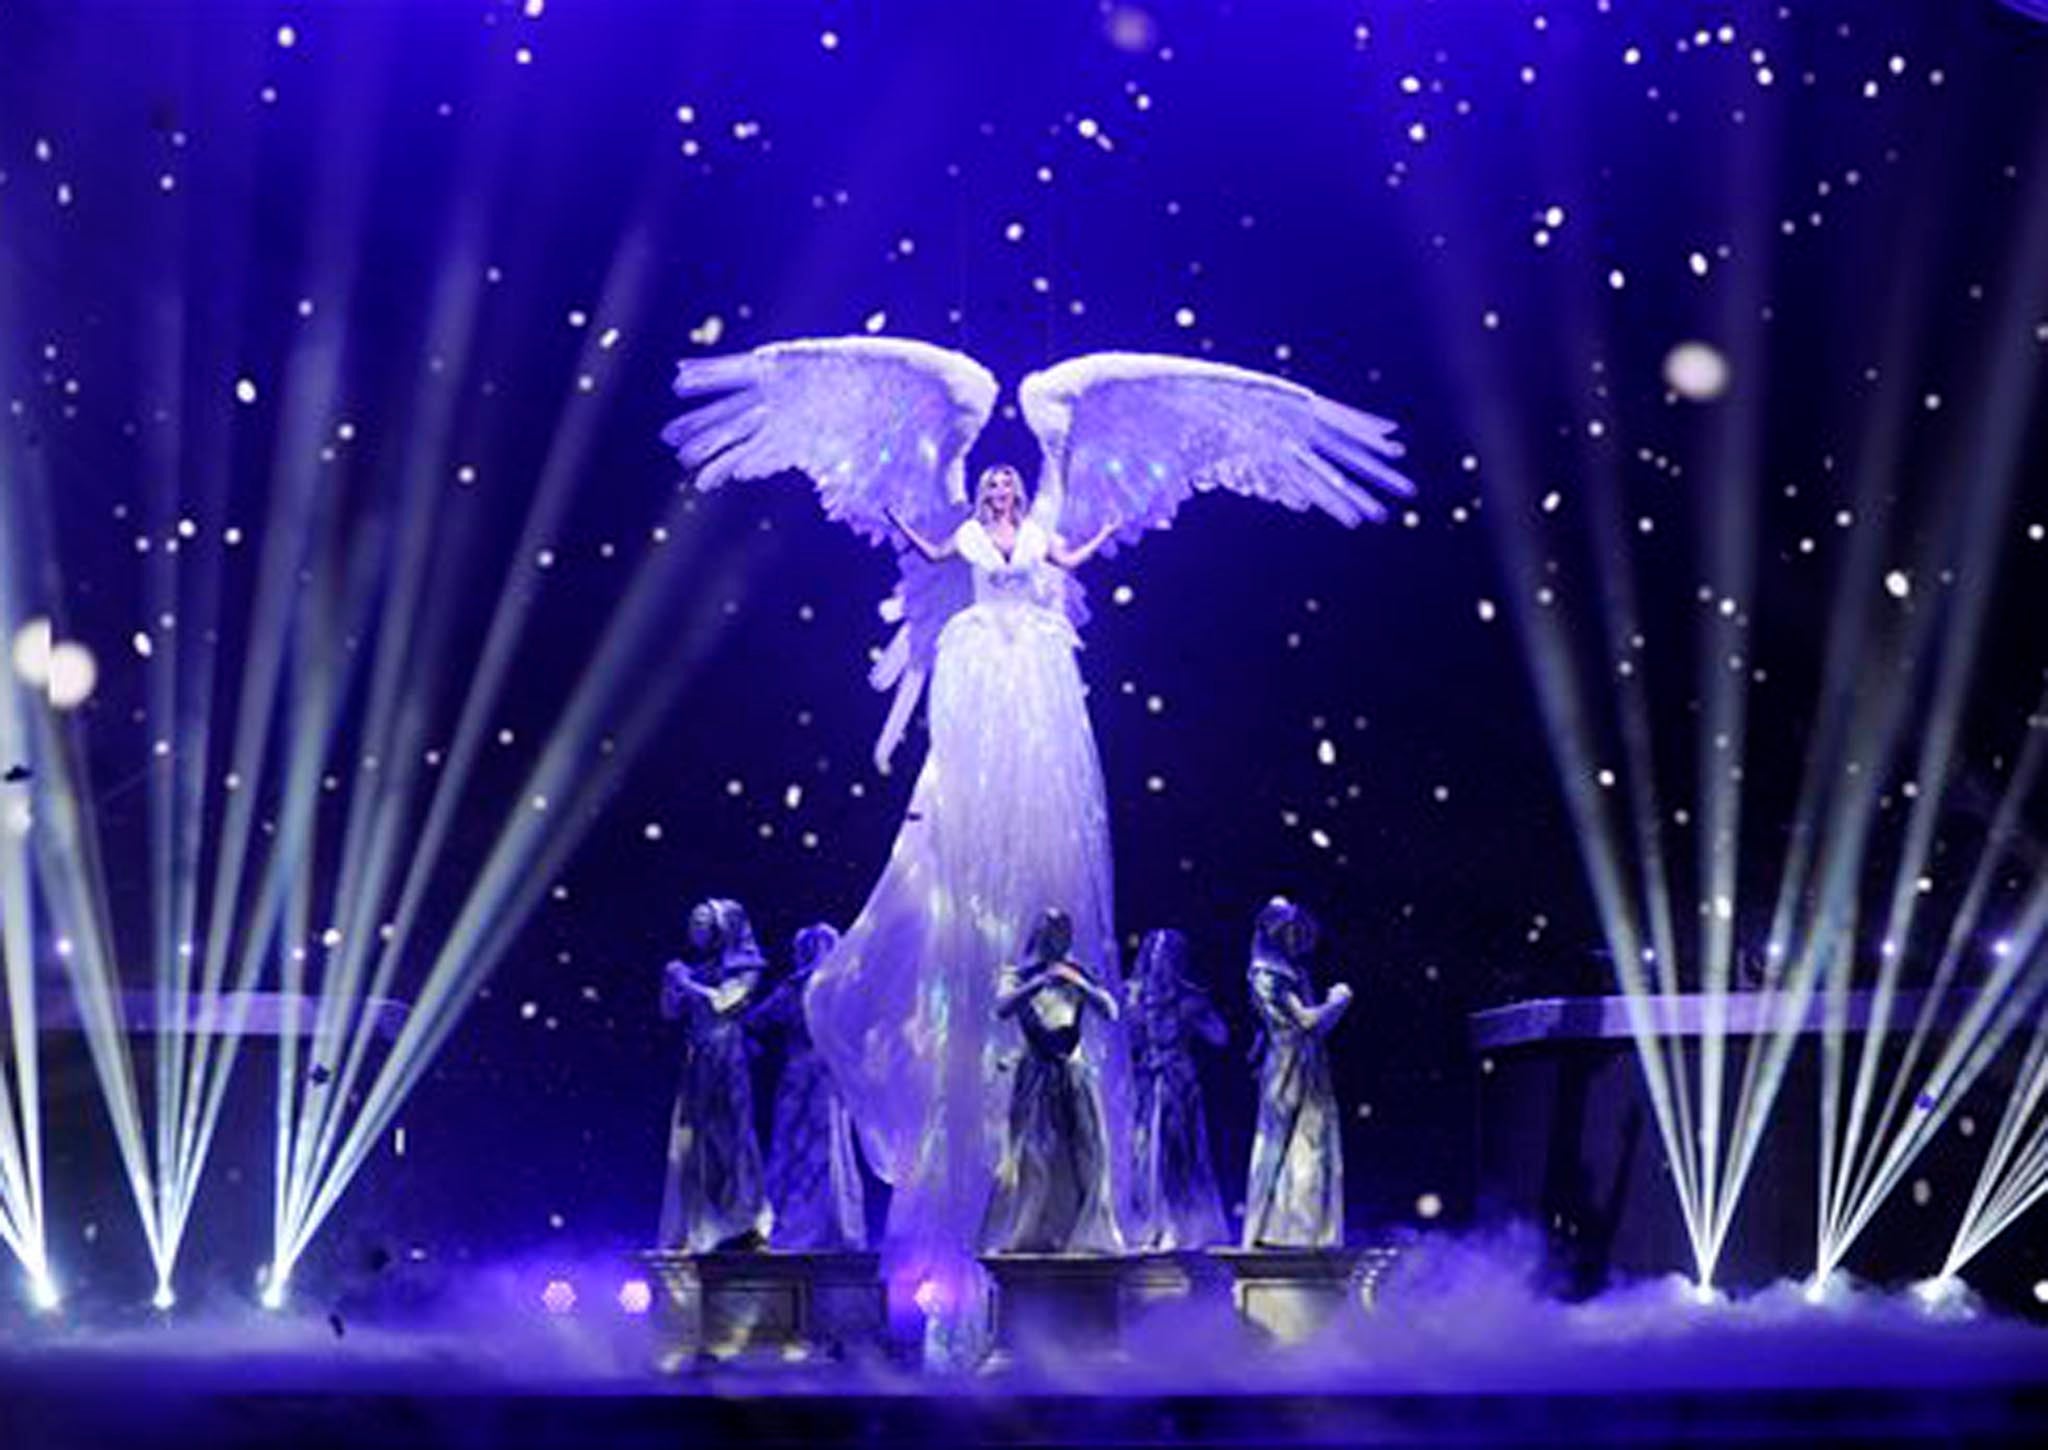 Britney Spears becomes a floating angel for a performance of 'Everytime'